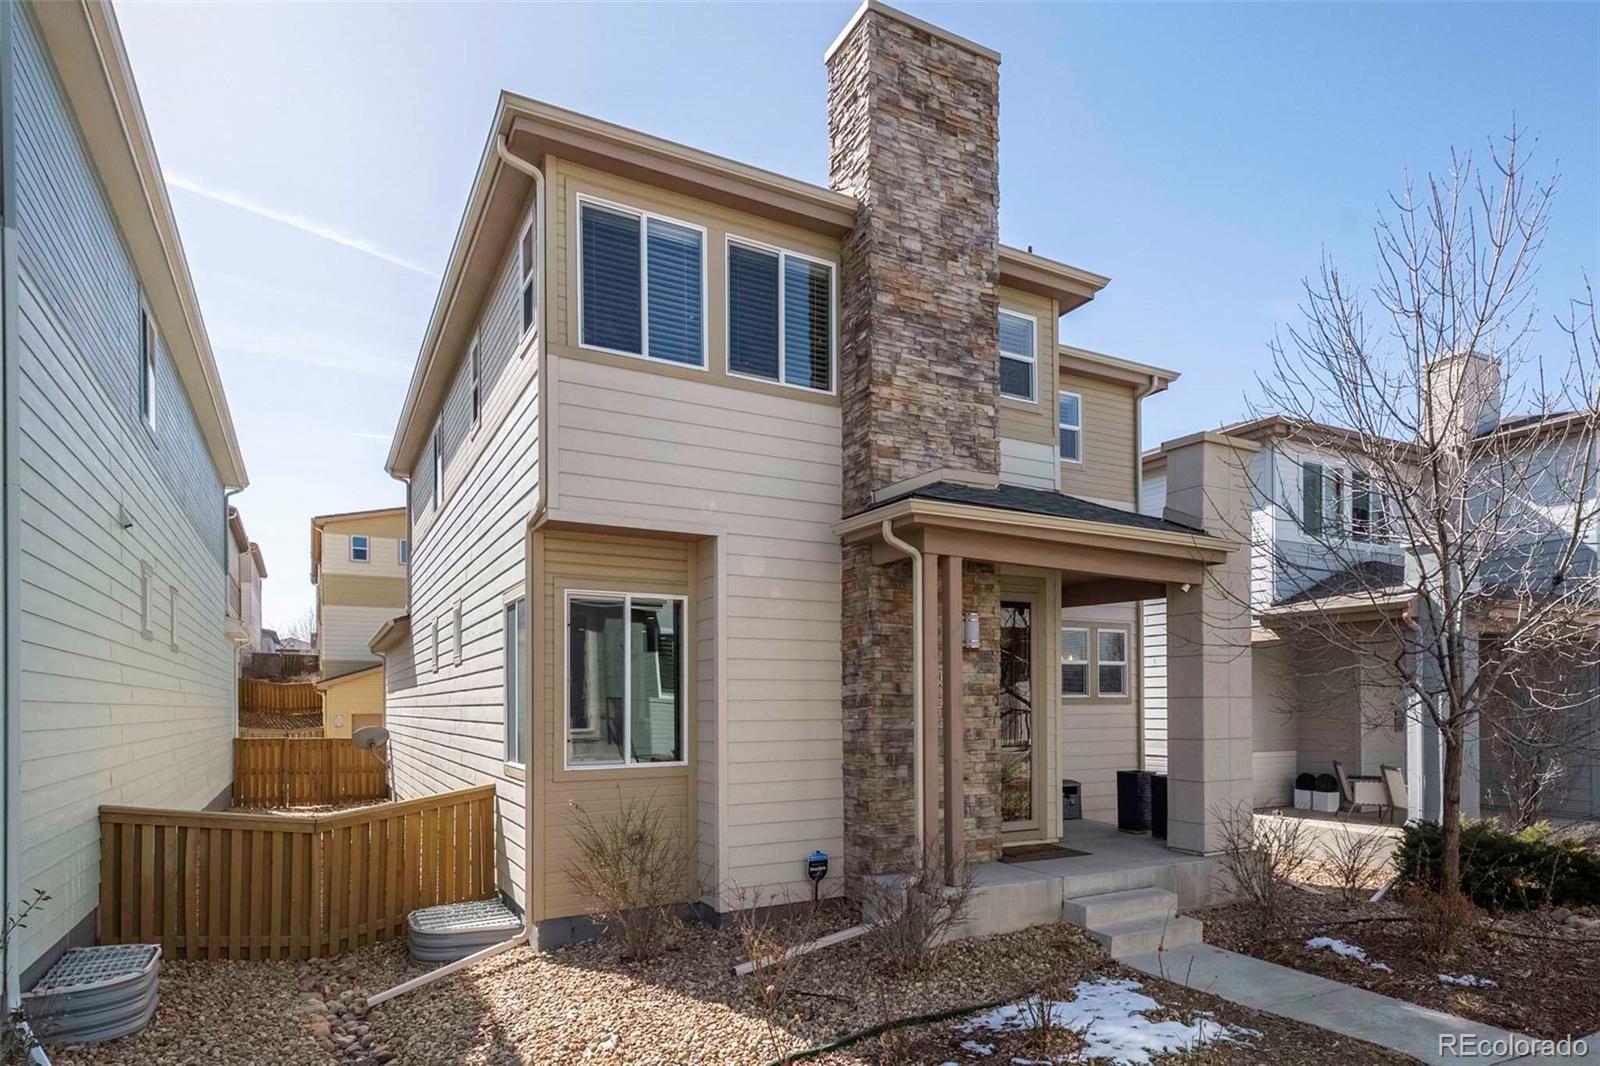 9652  dunning circle, Highlands Ranch sold home. Closed on 2024-04-05 for $650,000.